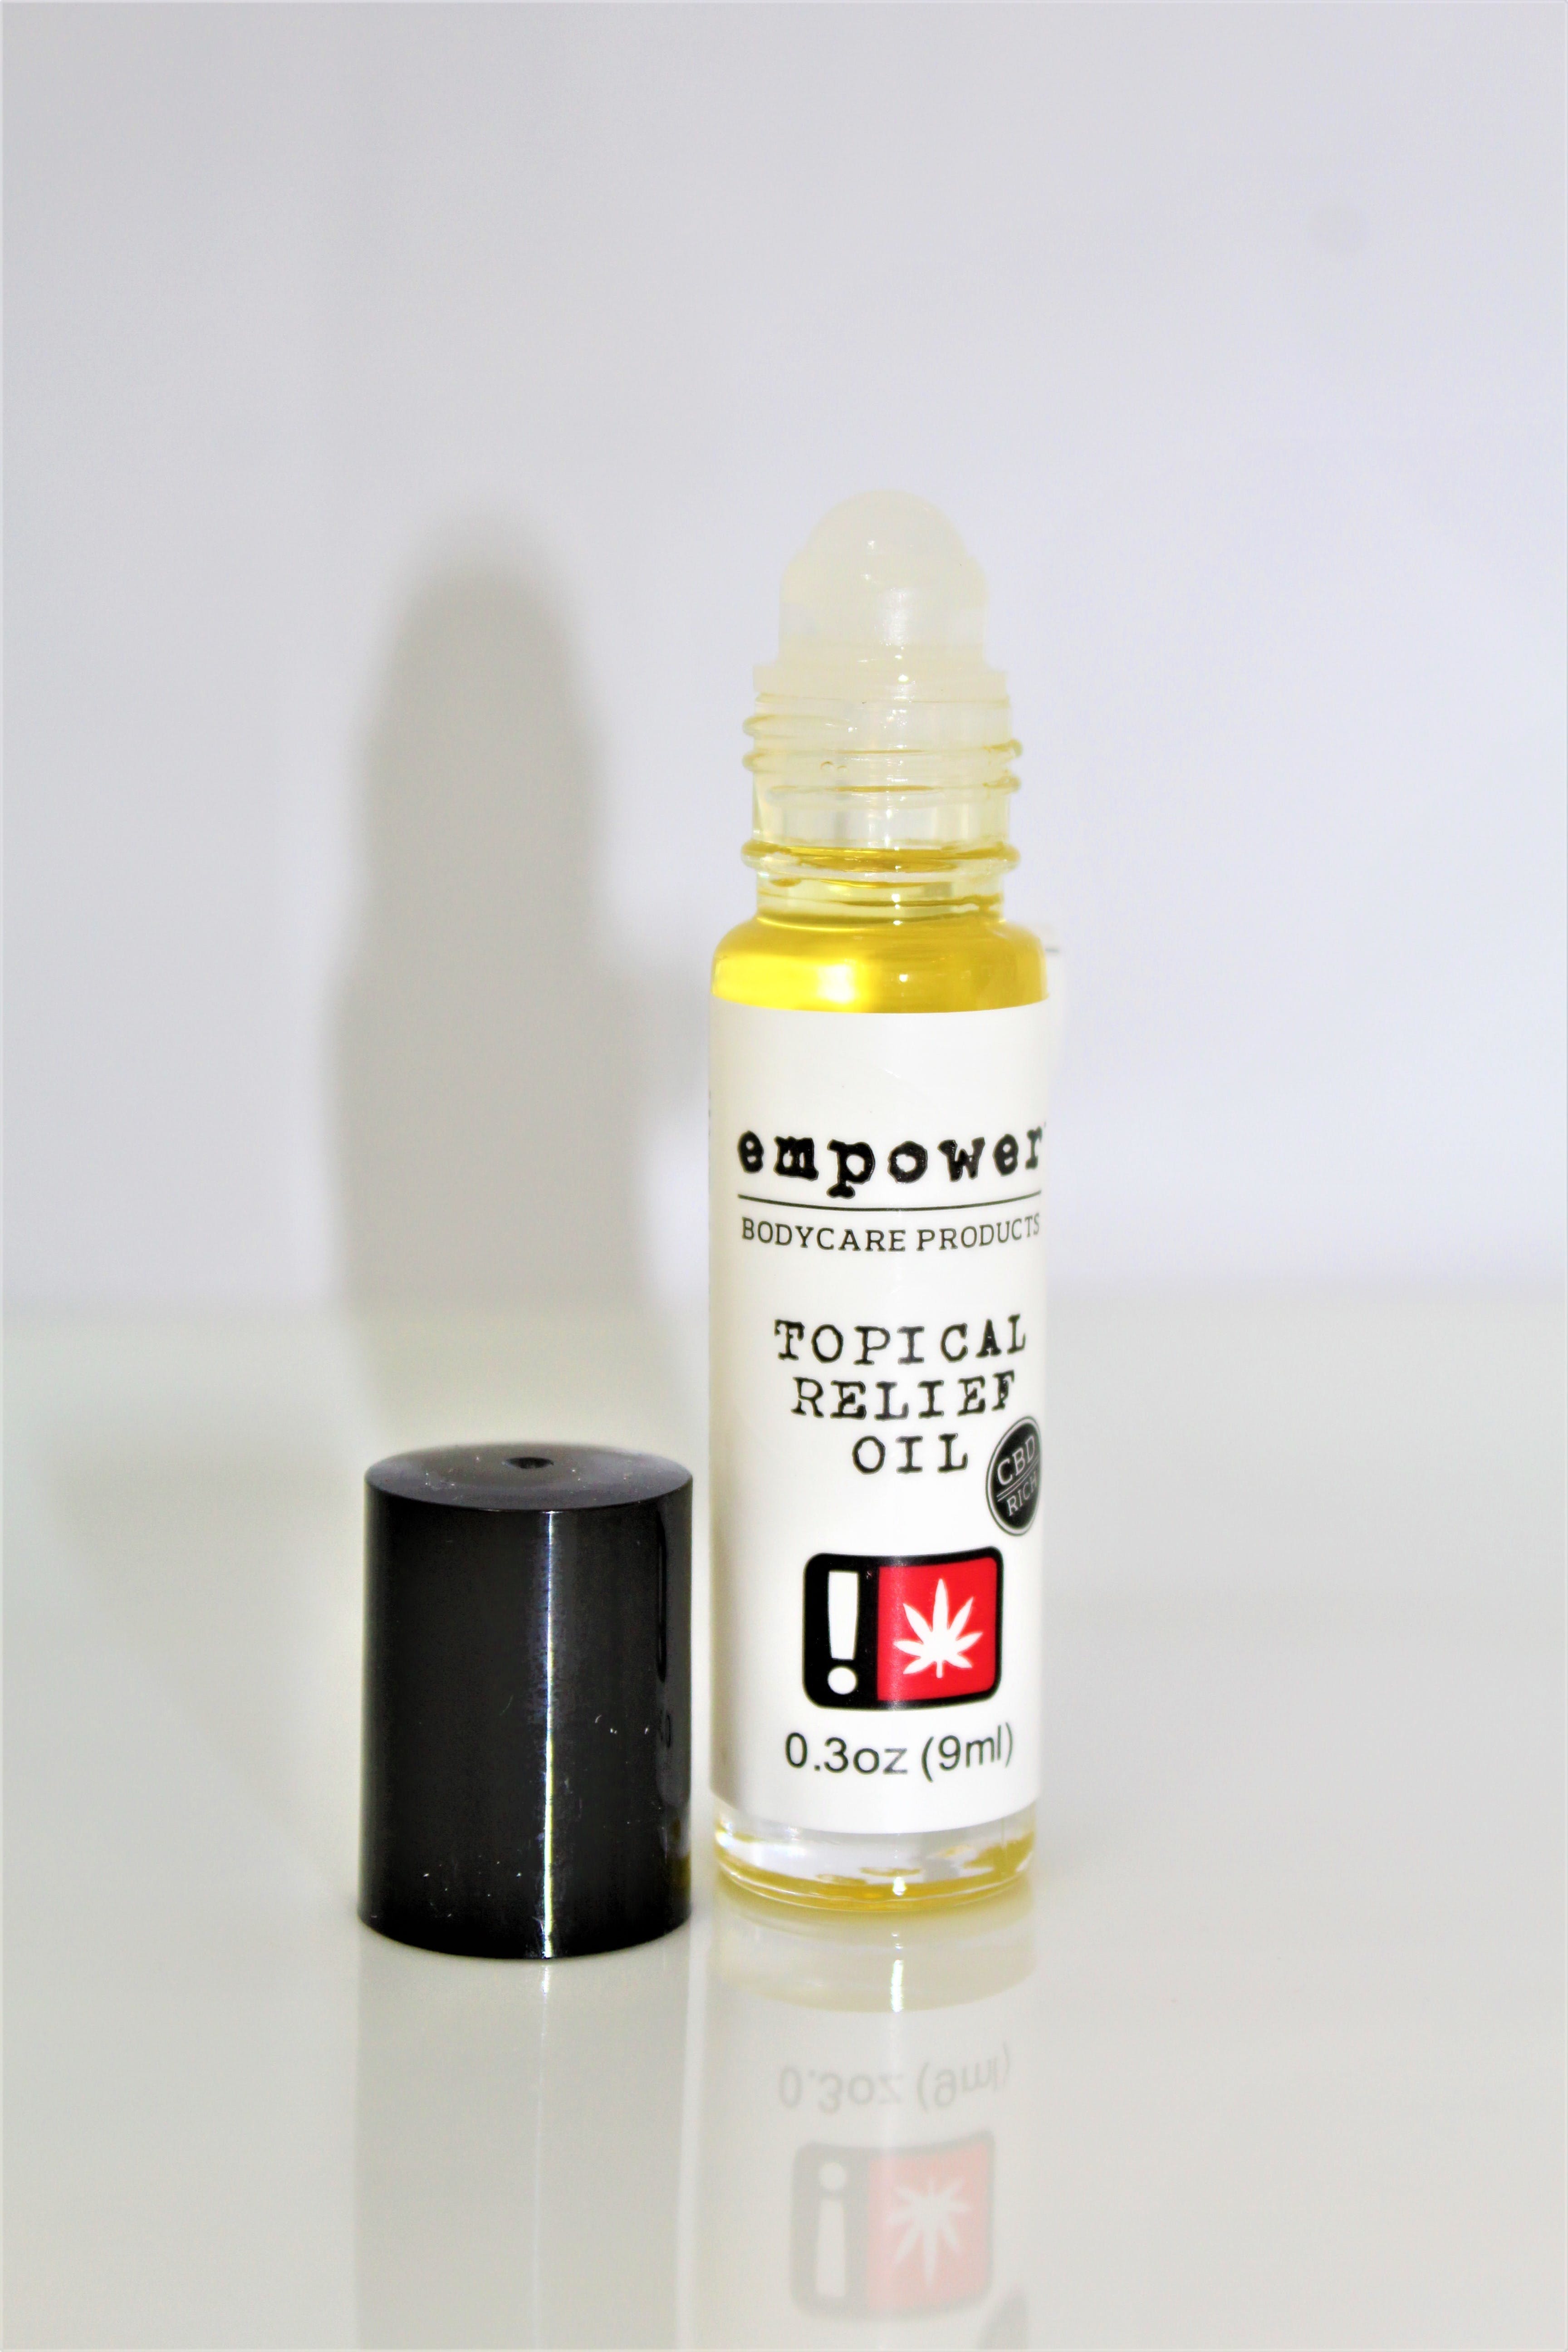 topicals-white-label-topical-relief-oil-9ml-69-1mg-cbd-empower